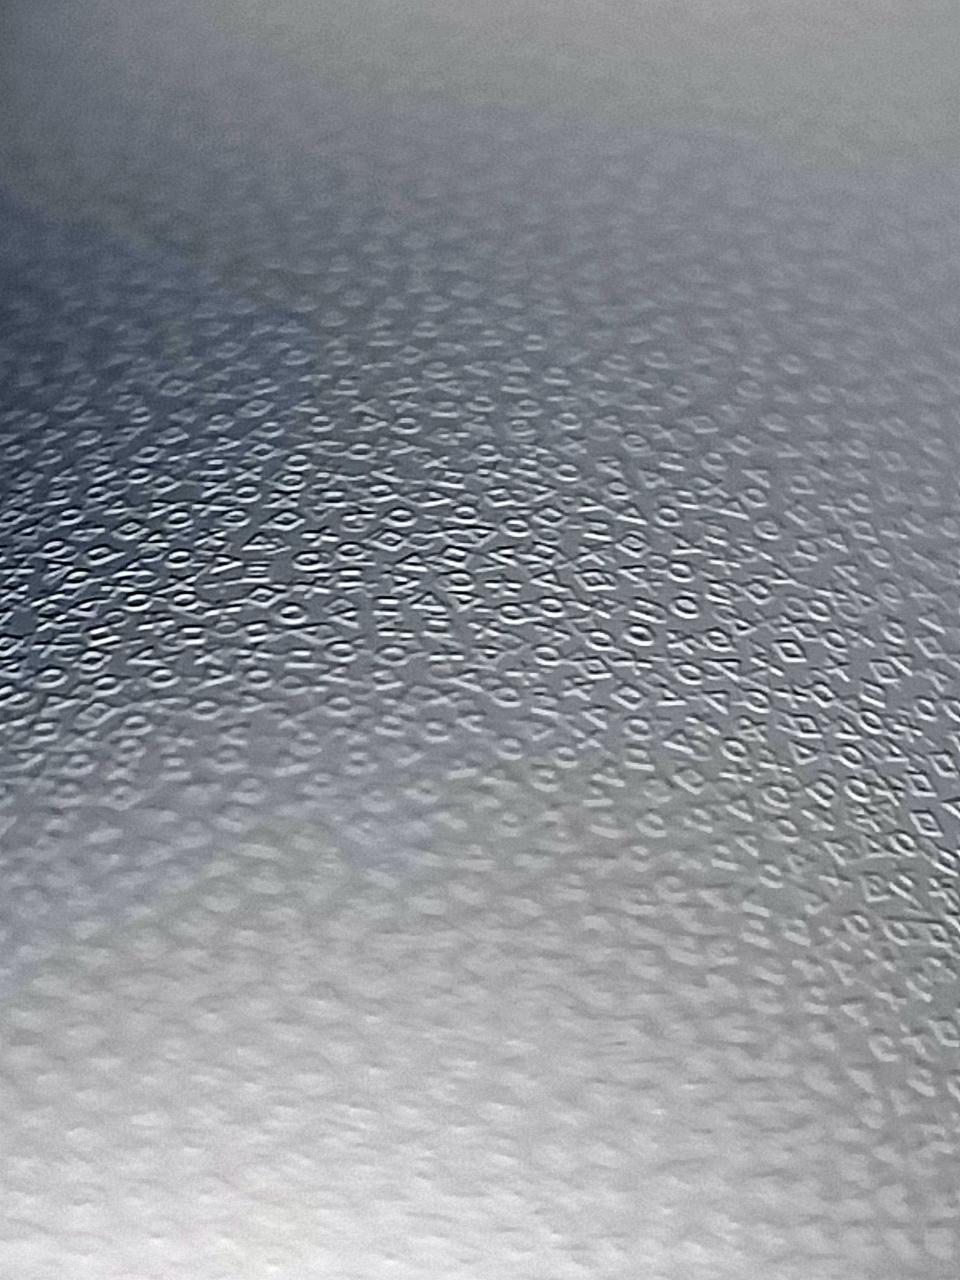 Close-up of surface with a mass of symbols